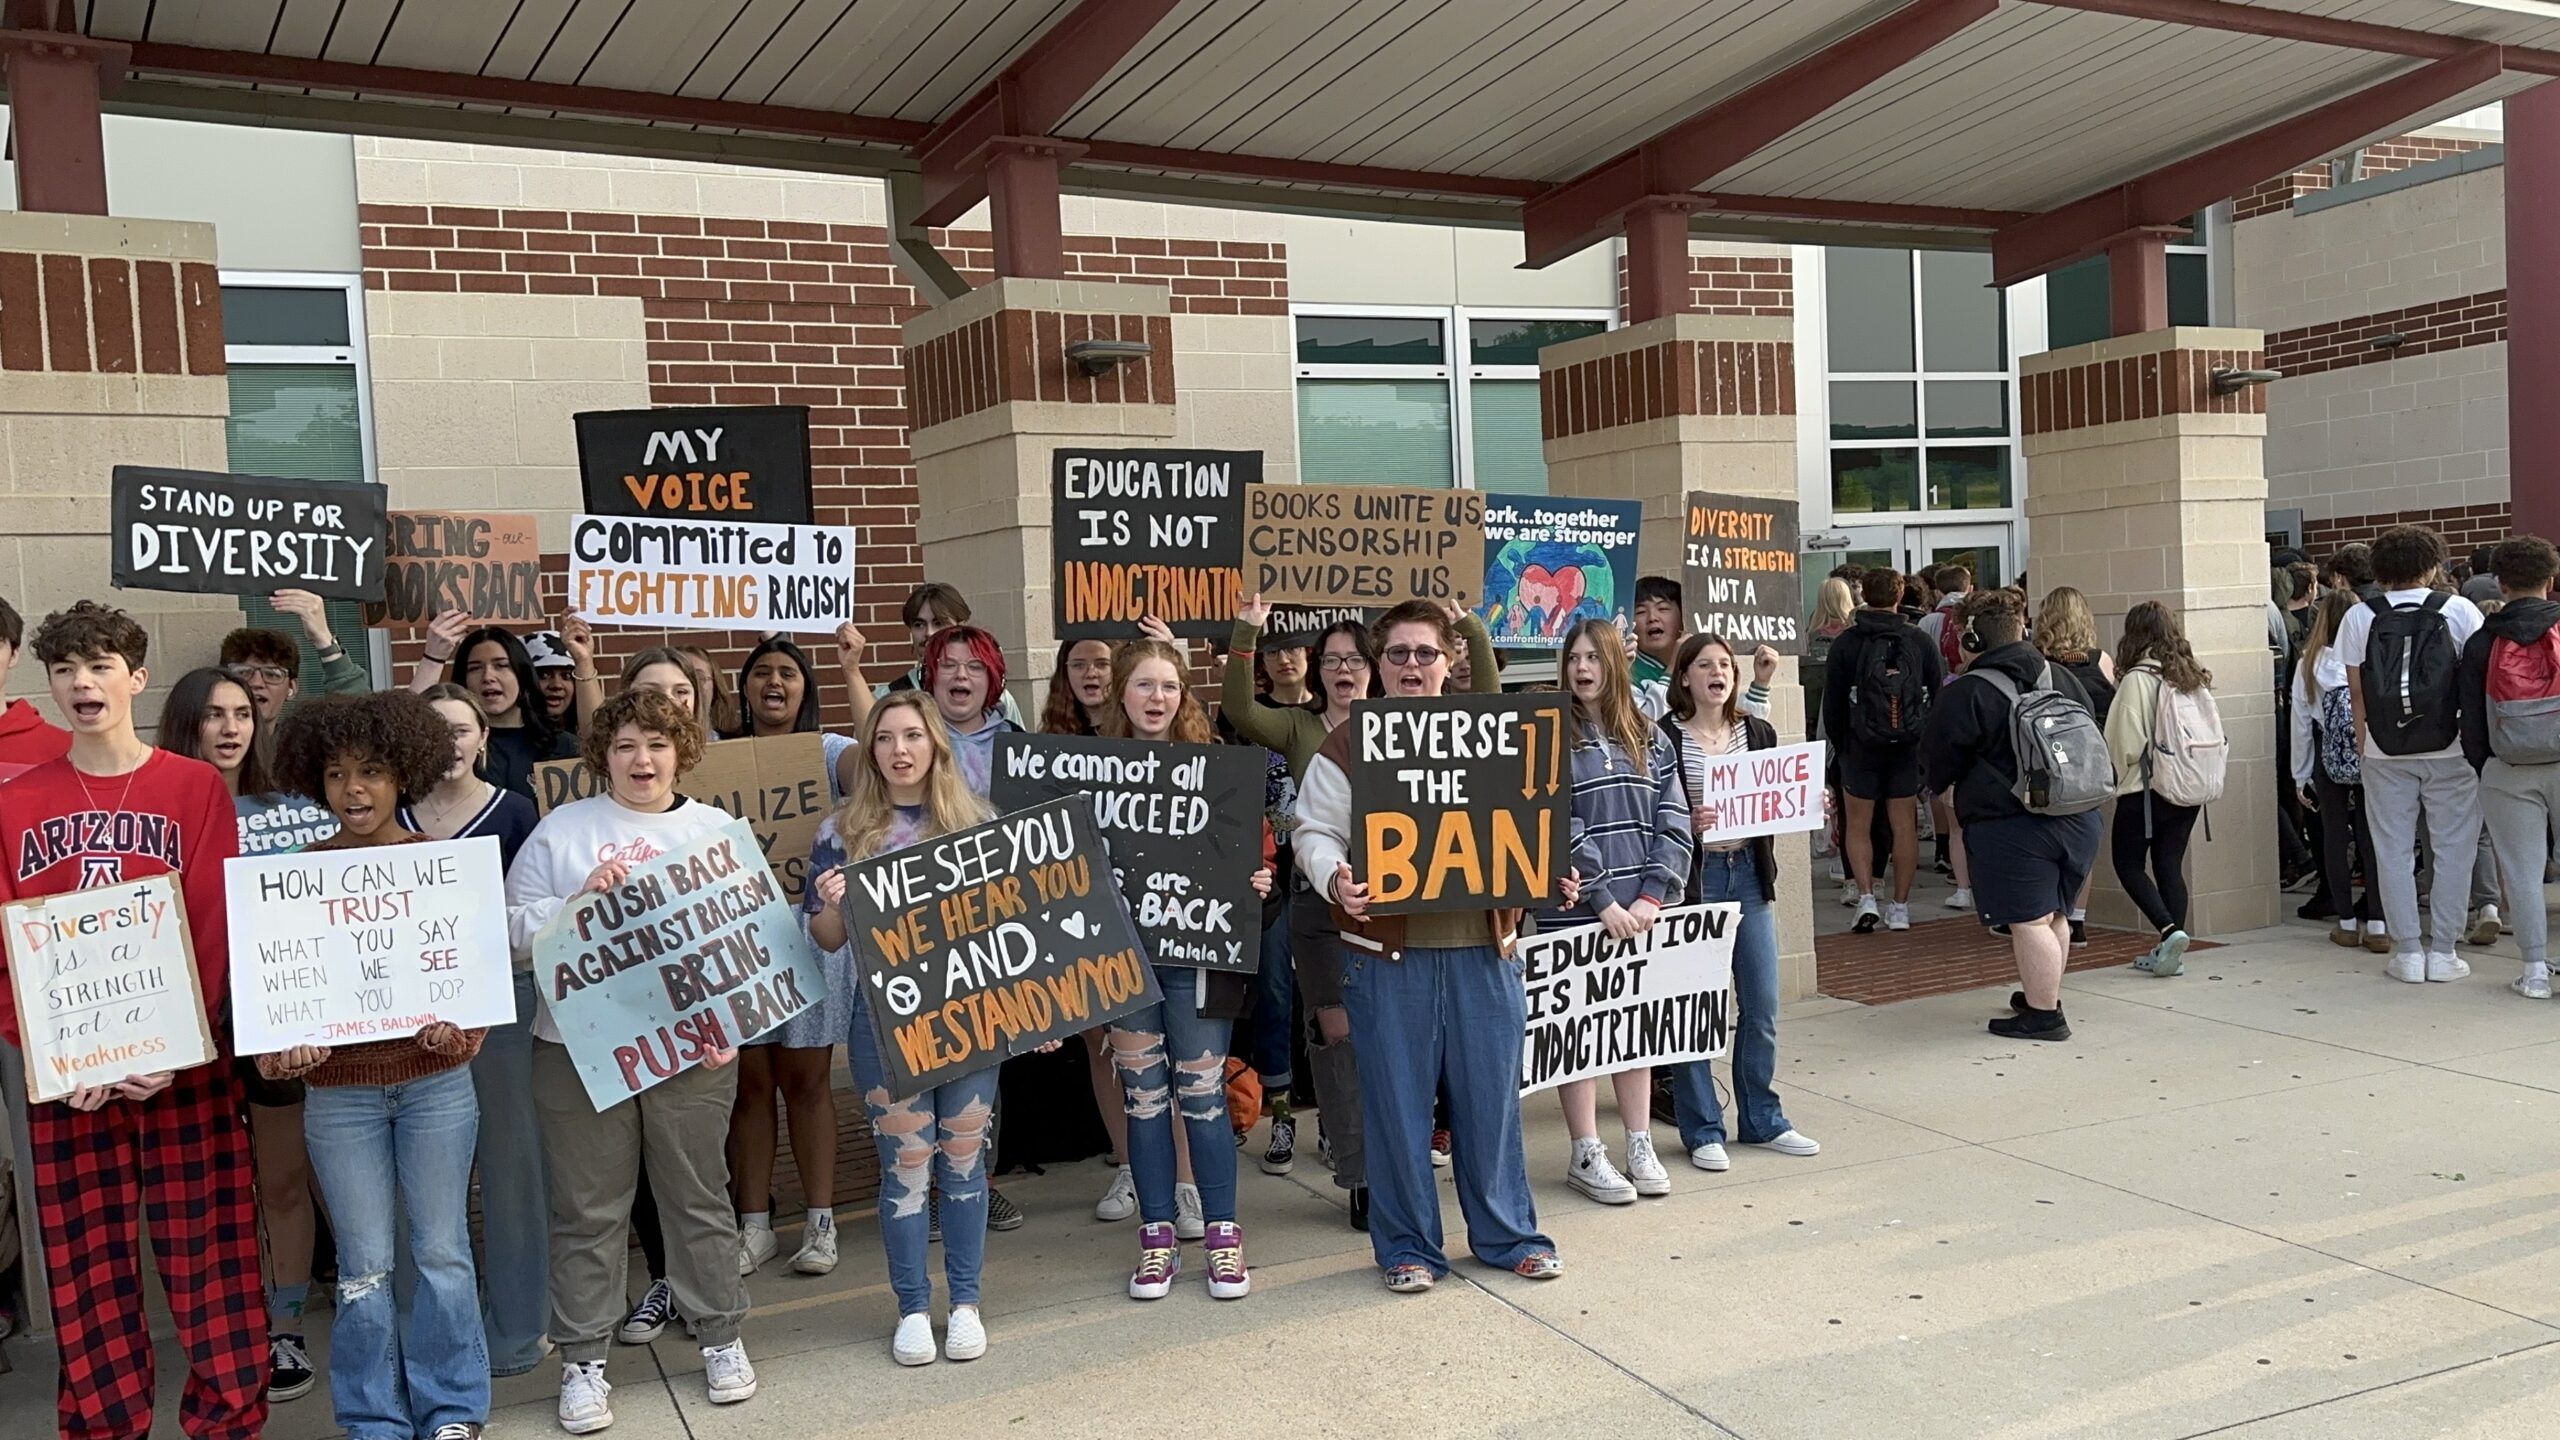 Image of PARU student members protesting book bans at Central York High School